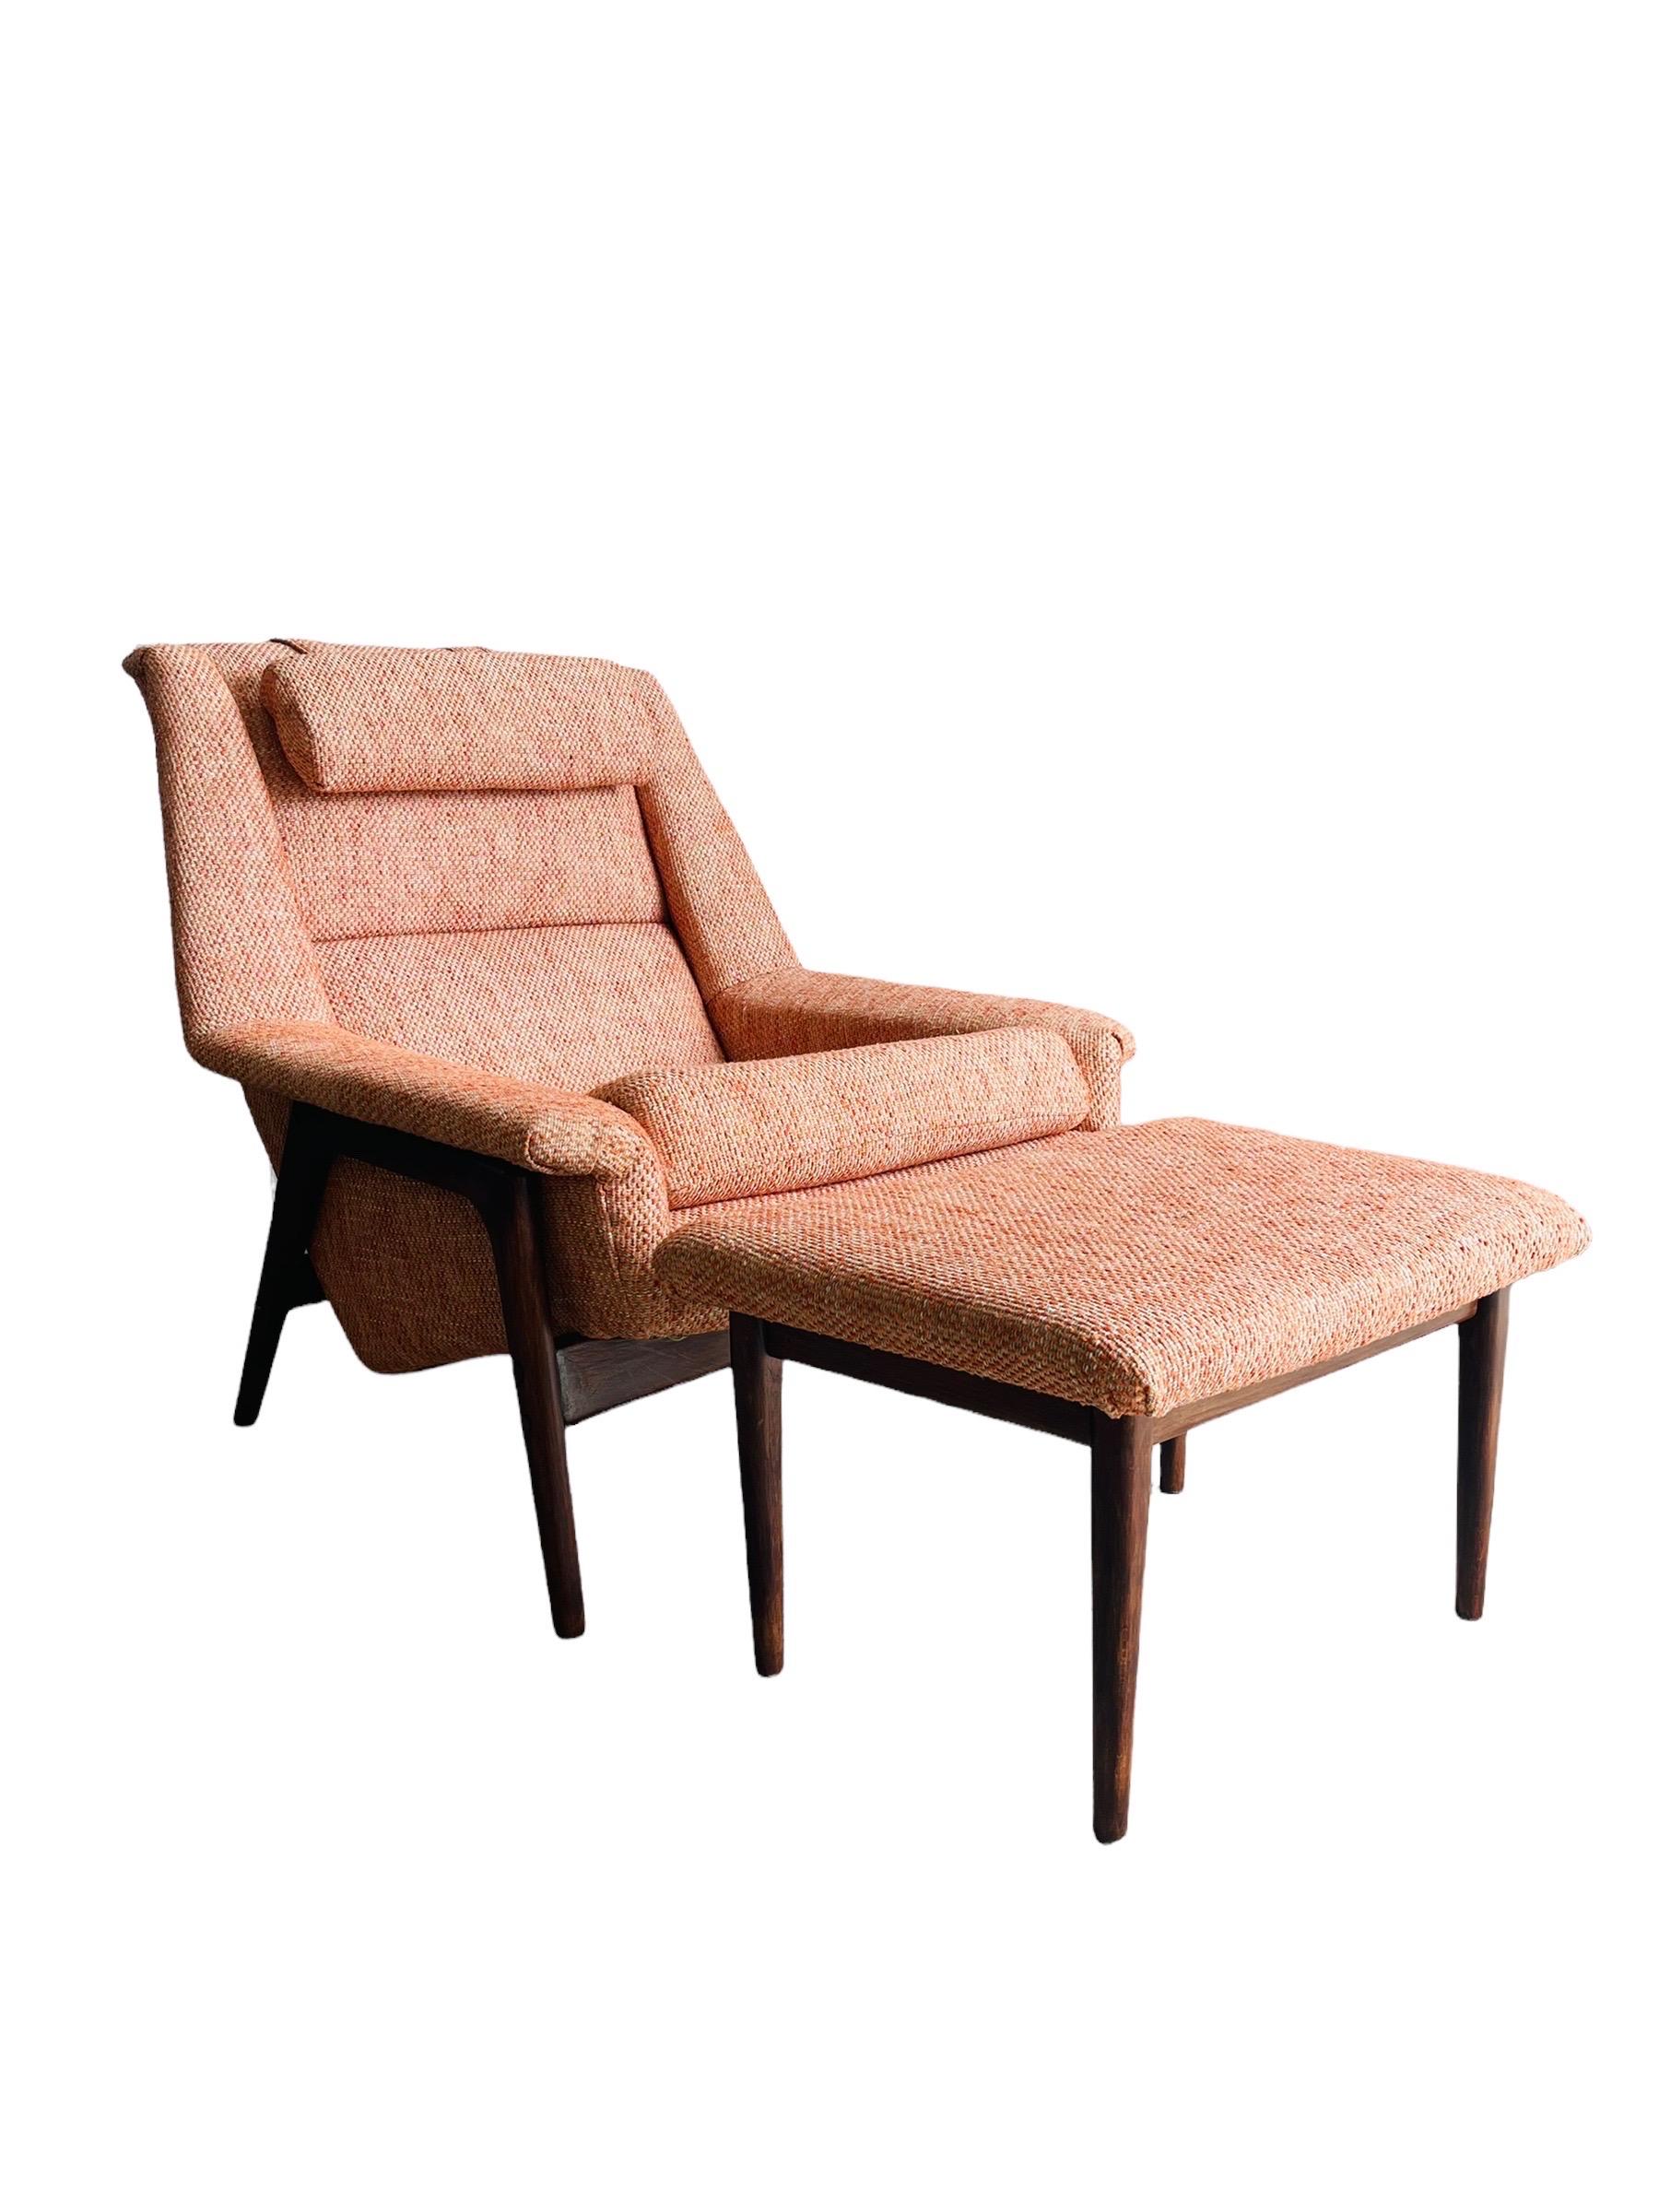 Stunning Mid-Century Modern Walnut lounge chair & ottoman designed by Folke Ohlsson for DUX Furniture. This chair & ottoman is newly reupholstered with orang/peachy tweet fabric. The chair is in good vintage condition. 

Measures: Chair: W 33.5” x